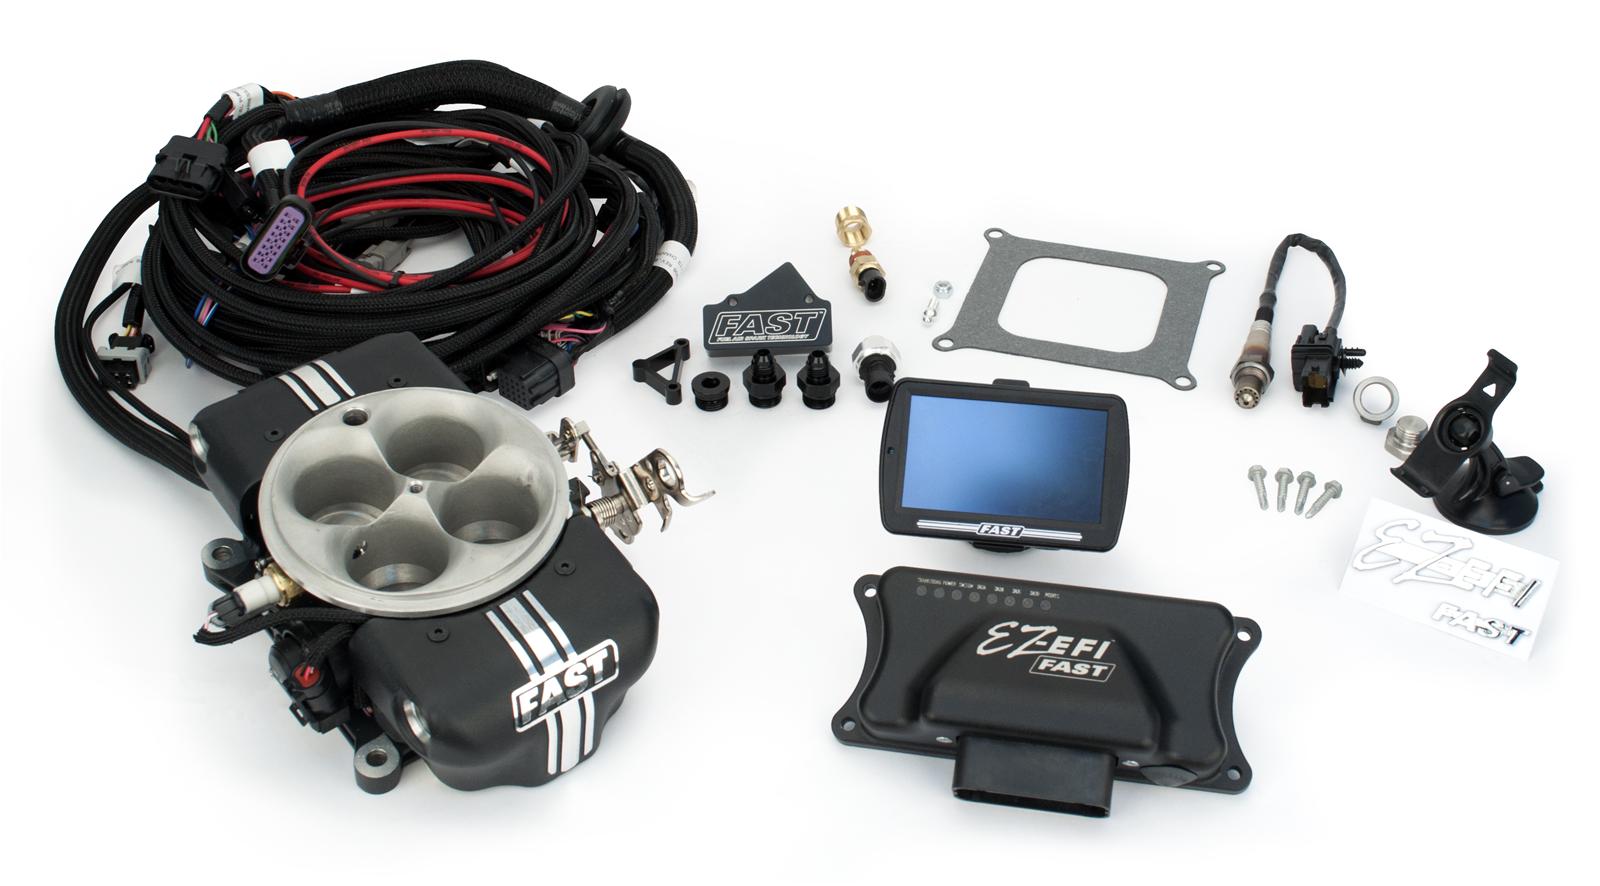 FAST EZ-EFI 2.0 Self-Tuning Fuel Injection Systems 30400-KIT. 